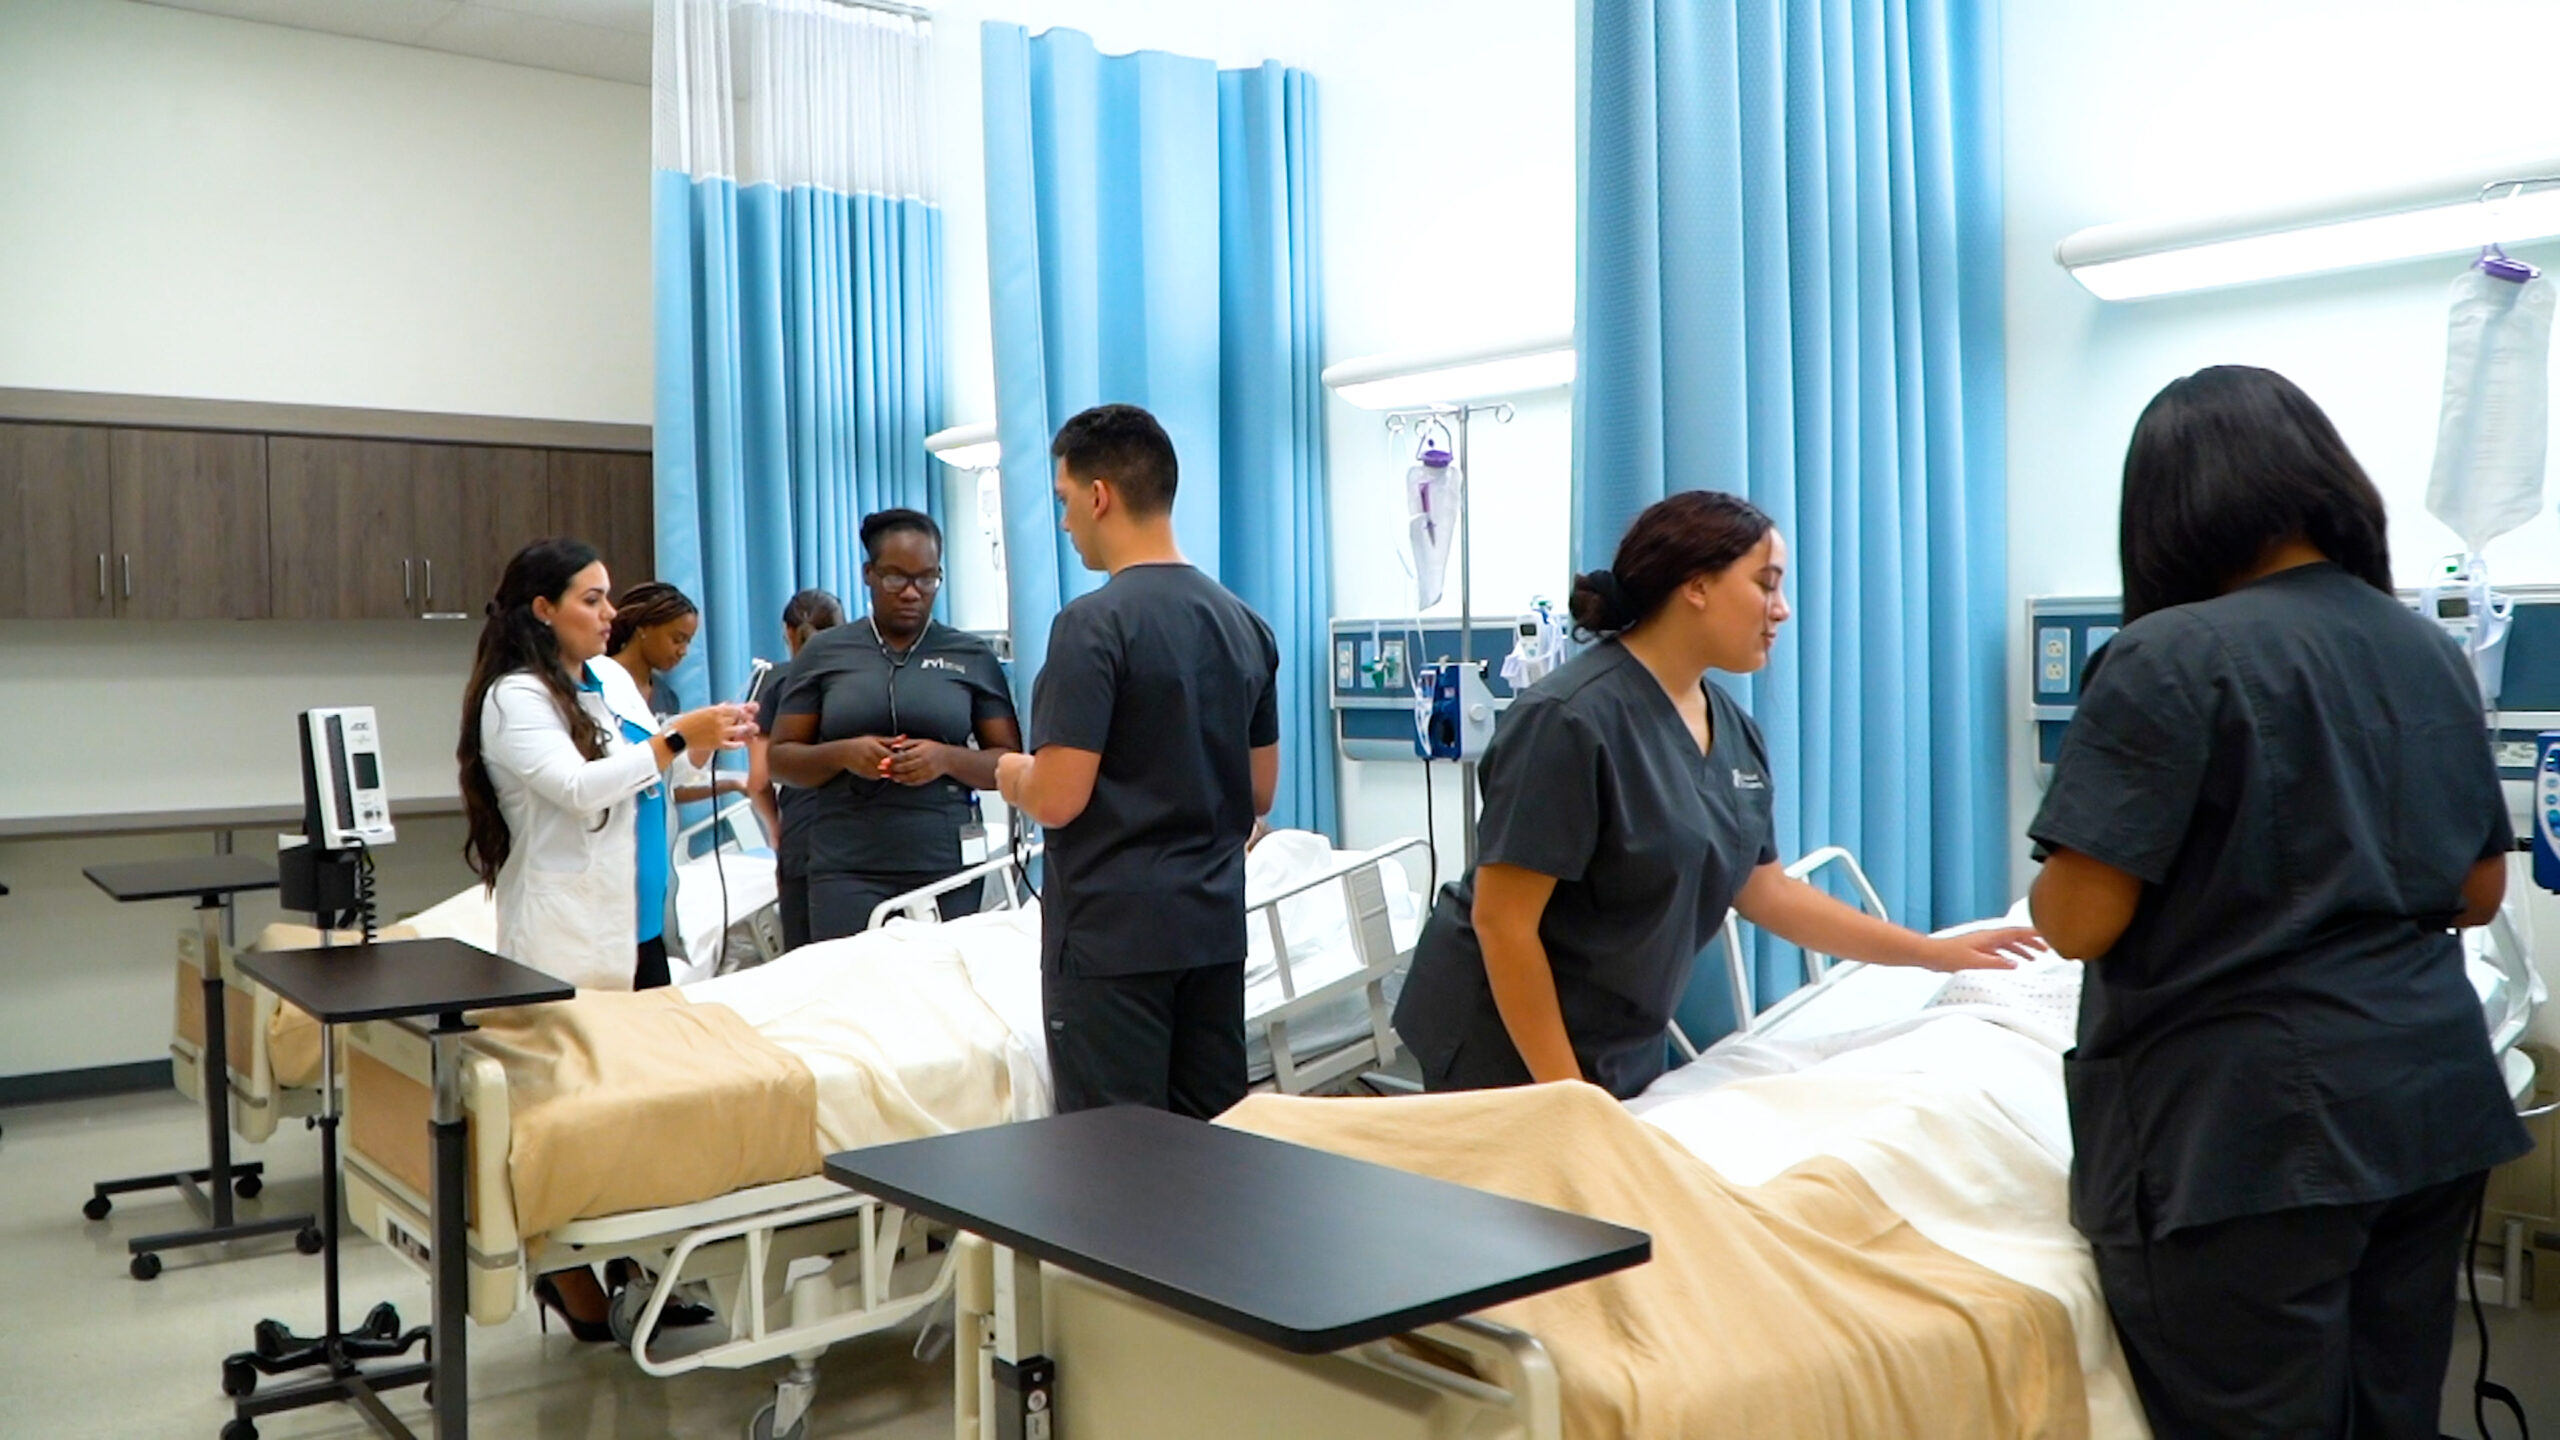 Students are practicing in an FVI skills lab under the supervision of a member of the nursing faculty